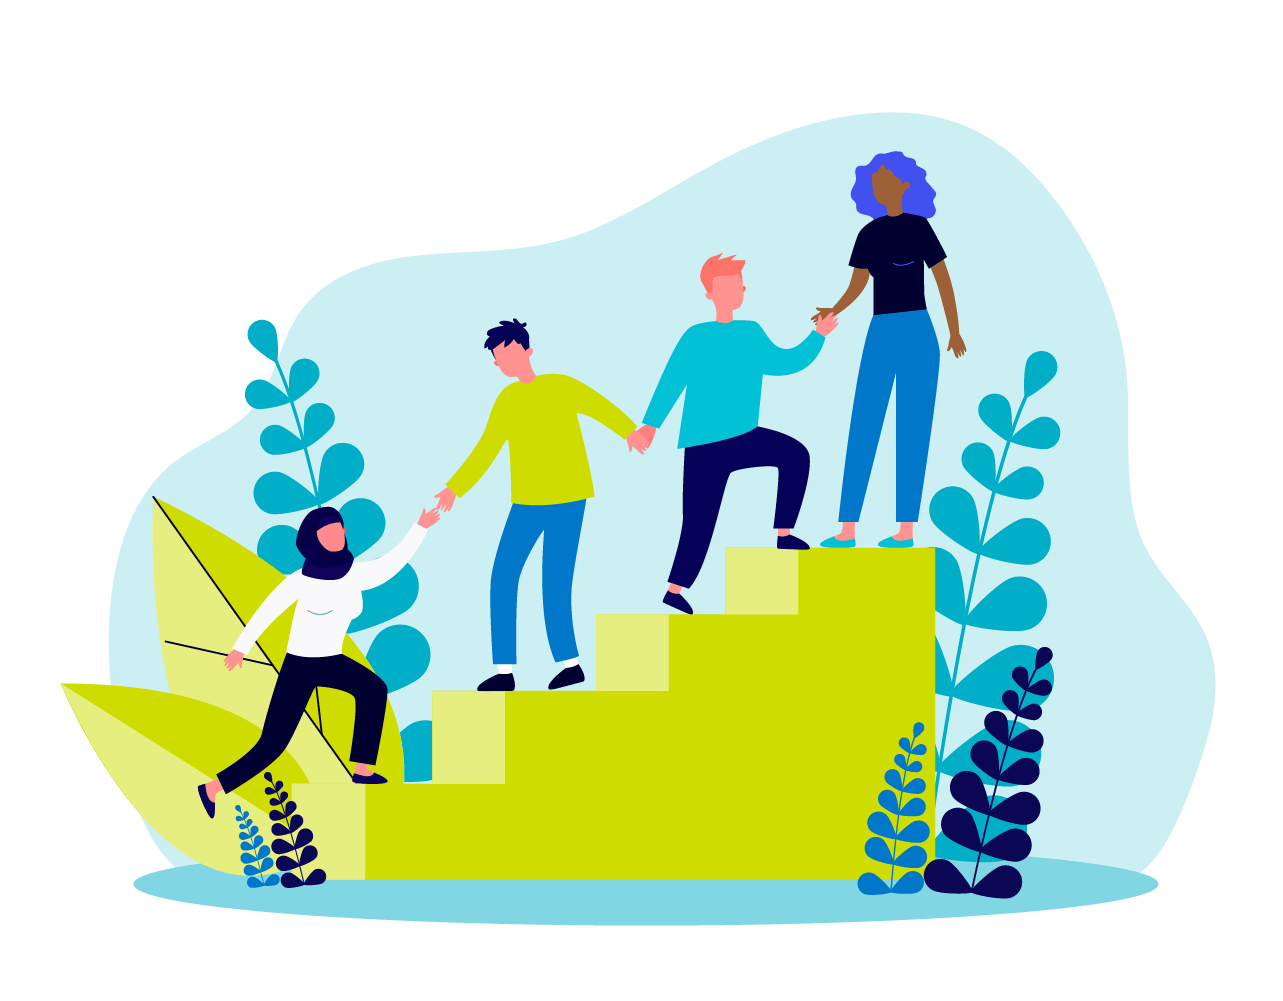 Illustration of four people walking up stairs giving the person behind them a helping hand